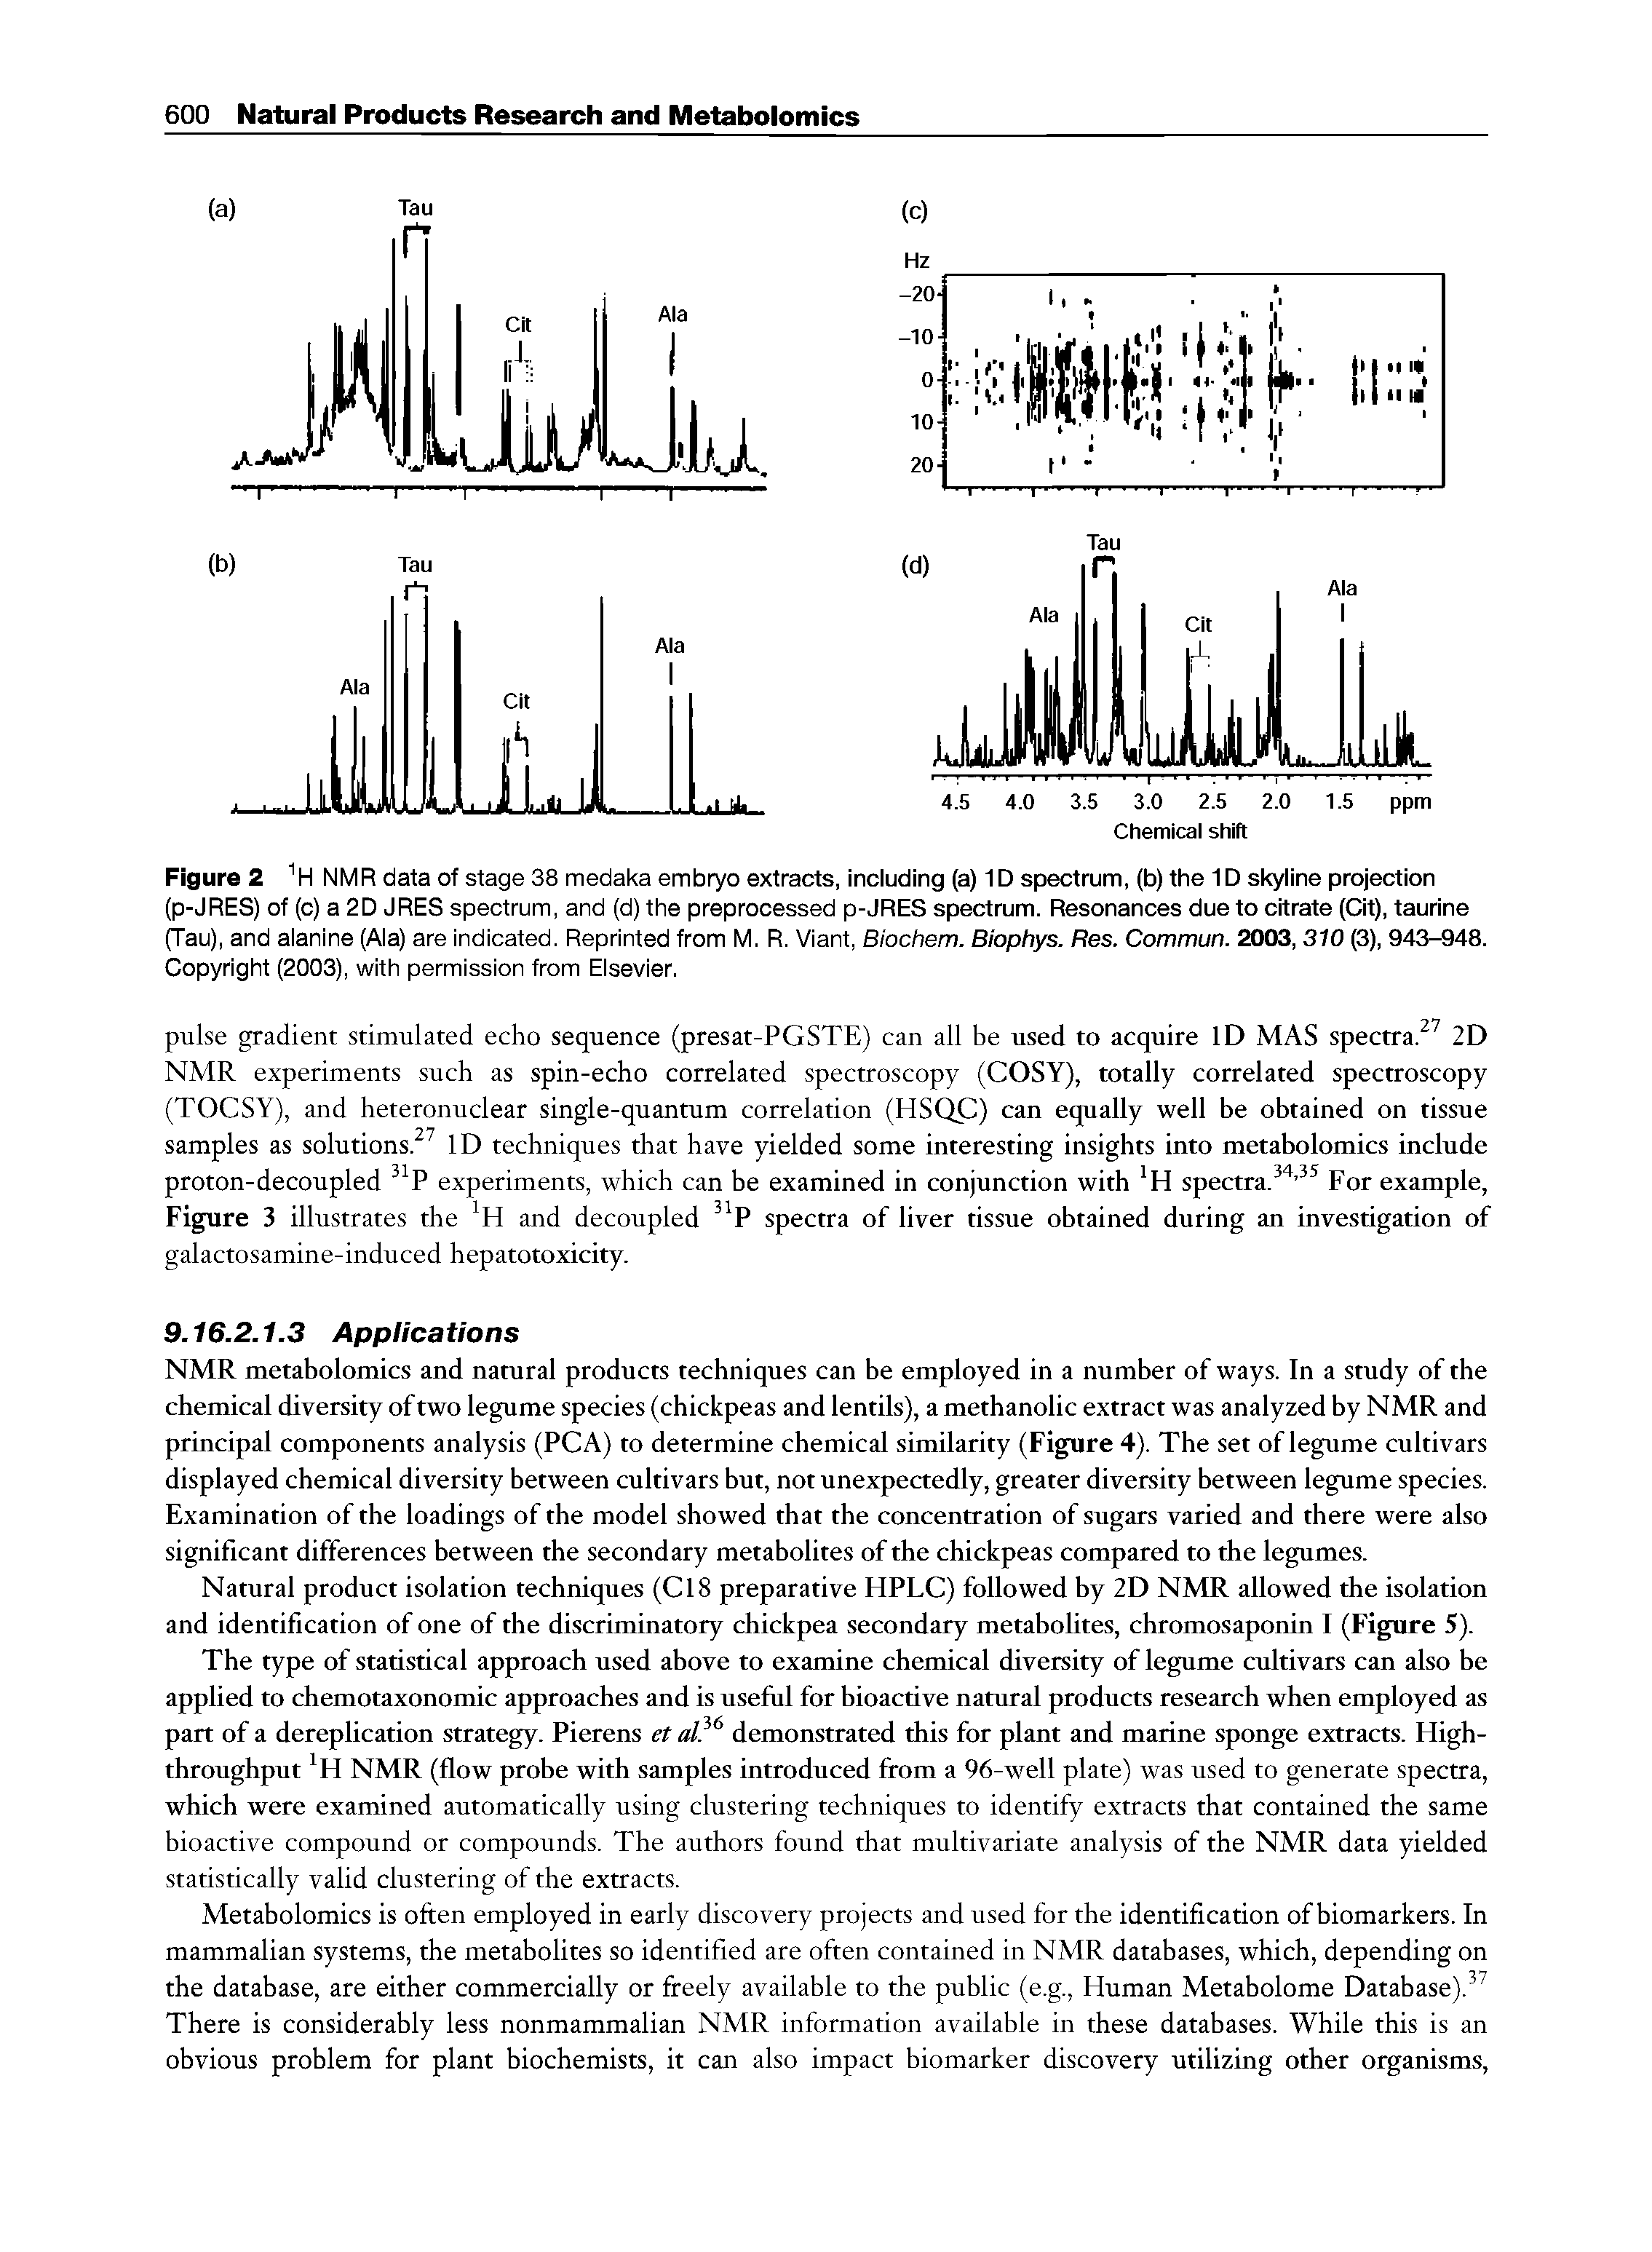 Figure 2 1H NMR data of stage 38 medaka embryo extracts, including (a) 1D spectrum, (b) the 1D skyline projection (p-JRES) of (c) a 2D JRES spectrum, and (d) the preprocessed p-JRES spectrum. Resonances due to citrate (Cit), taurine (Tau), and alanine (Ala) are indicated. Reprinted from M. R. Viant, Biochem. Biophys. Res. Commun. 2003, 310 (3), 943-948. Copyright (2003), with permission from Elsevier.